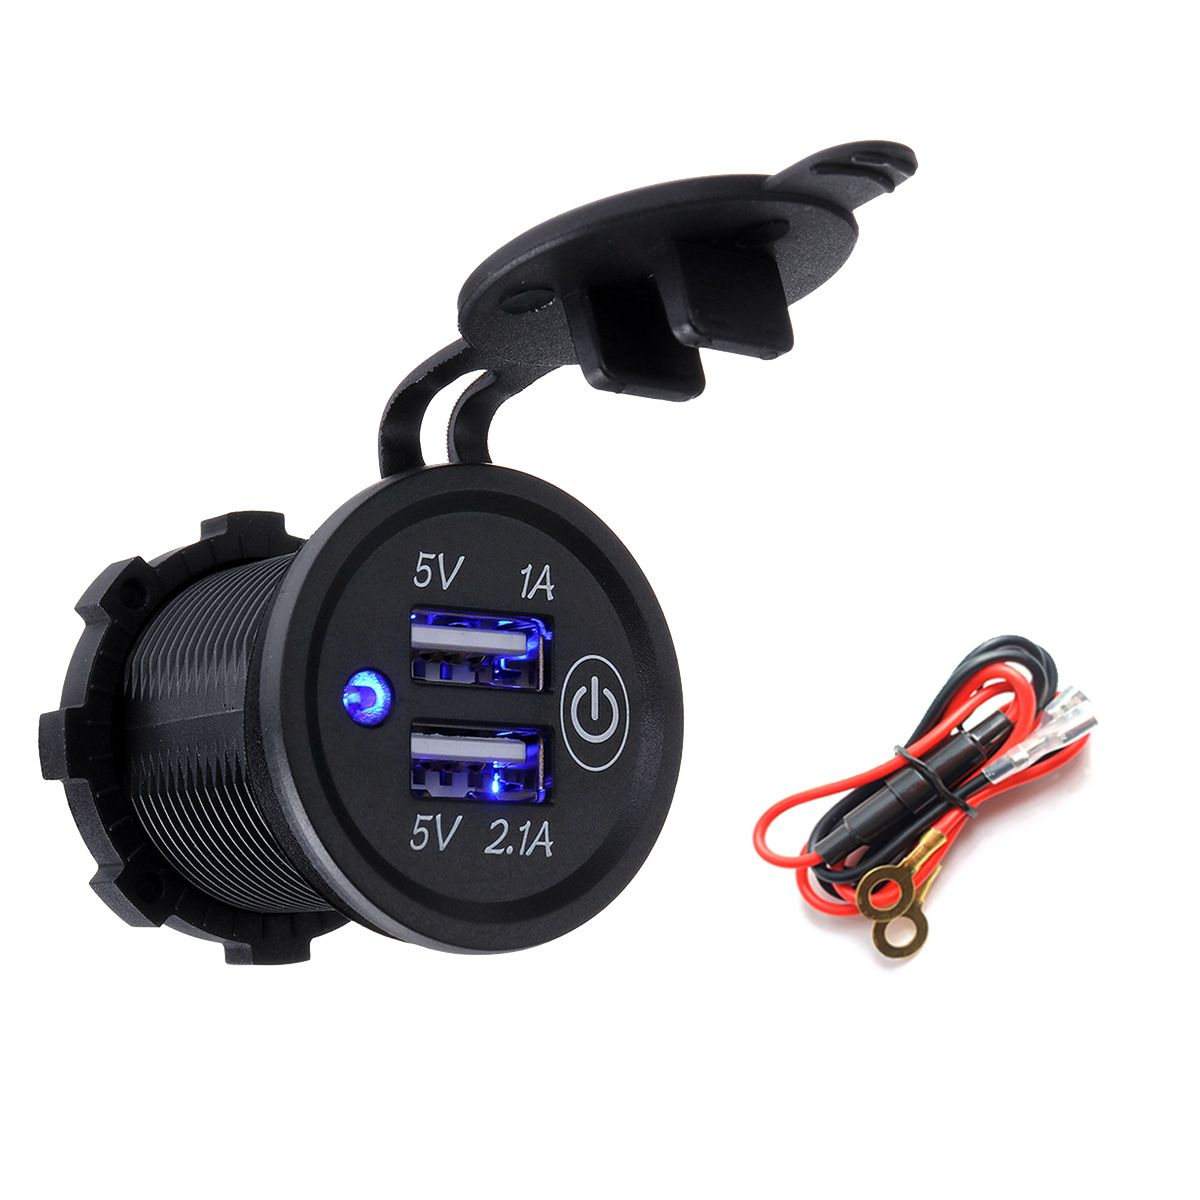 P1-S-Touch-Switch-21A1A-Dual-USB-Car-Motorized-Motor-Home-Modified-Charger-Mobile-Phone-12-24V-with--1534301